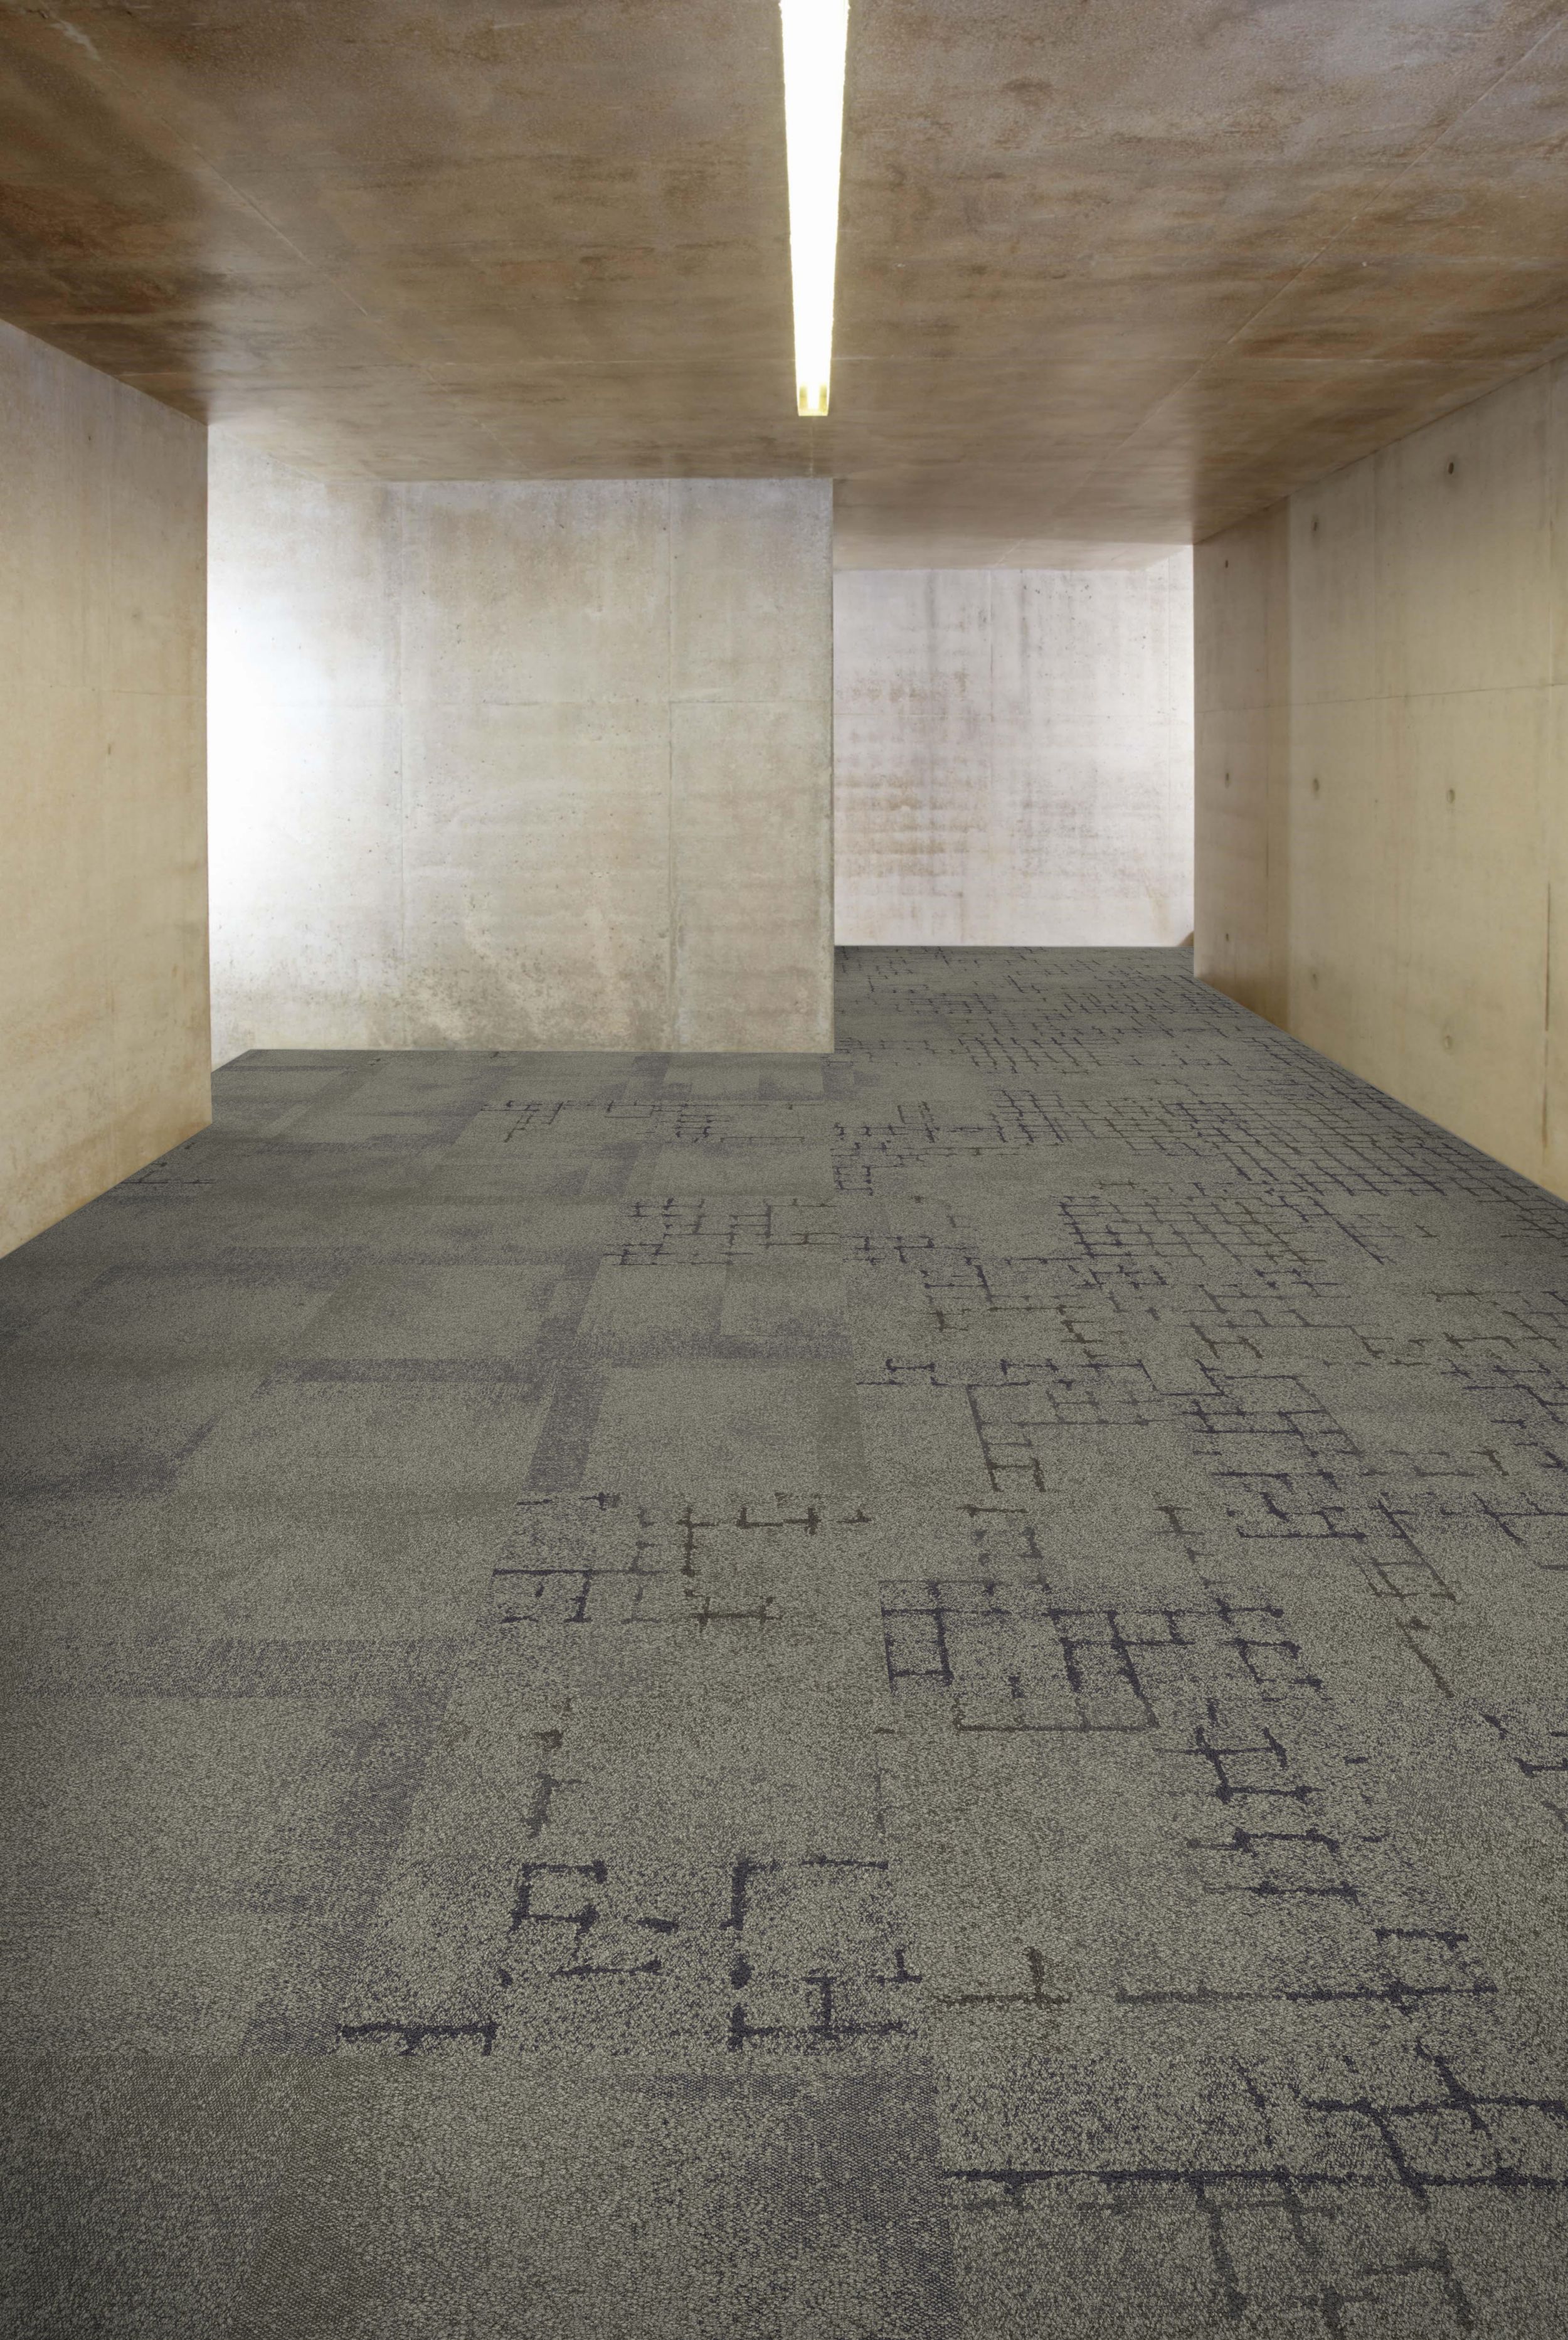 image Interface Flagstone, Kerbstone and Sett in Stone carpet tile in corridor with concrete walls and ceiling numéro 6